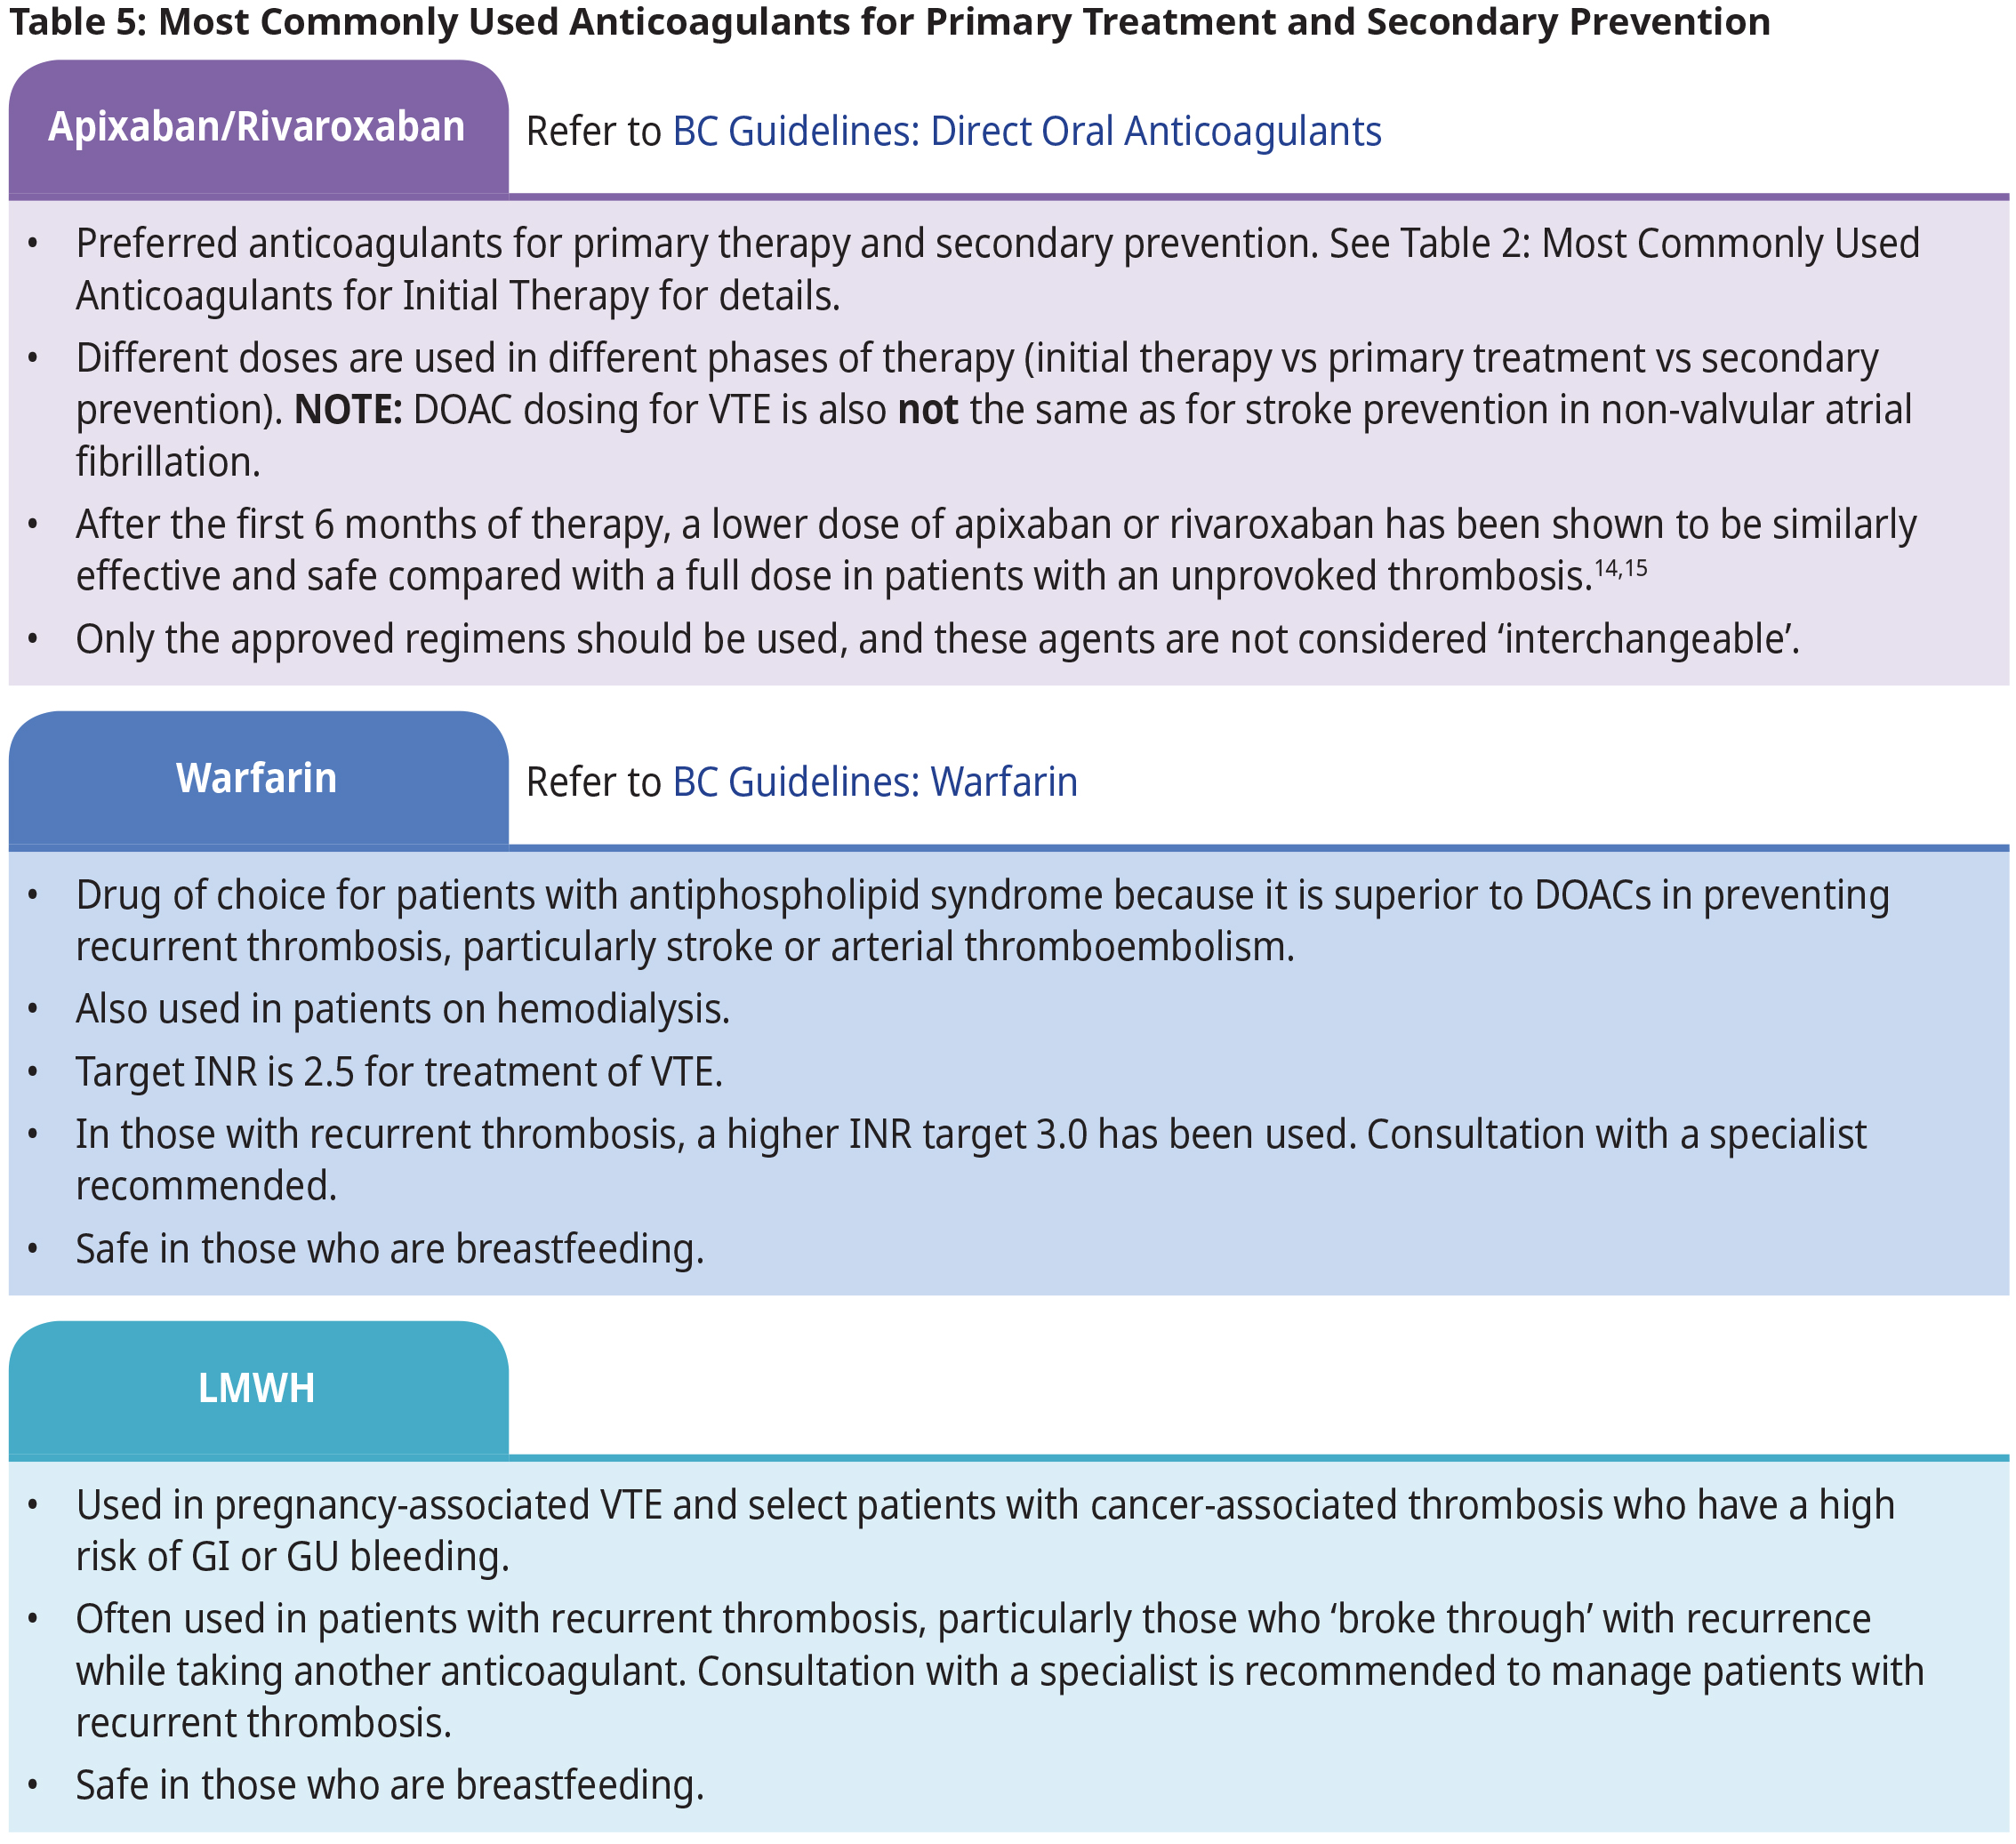 Most Commonly Used Anticoagulants for Primary Treatment and Secondary Prevention